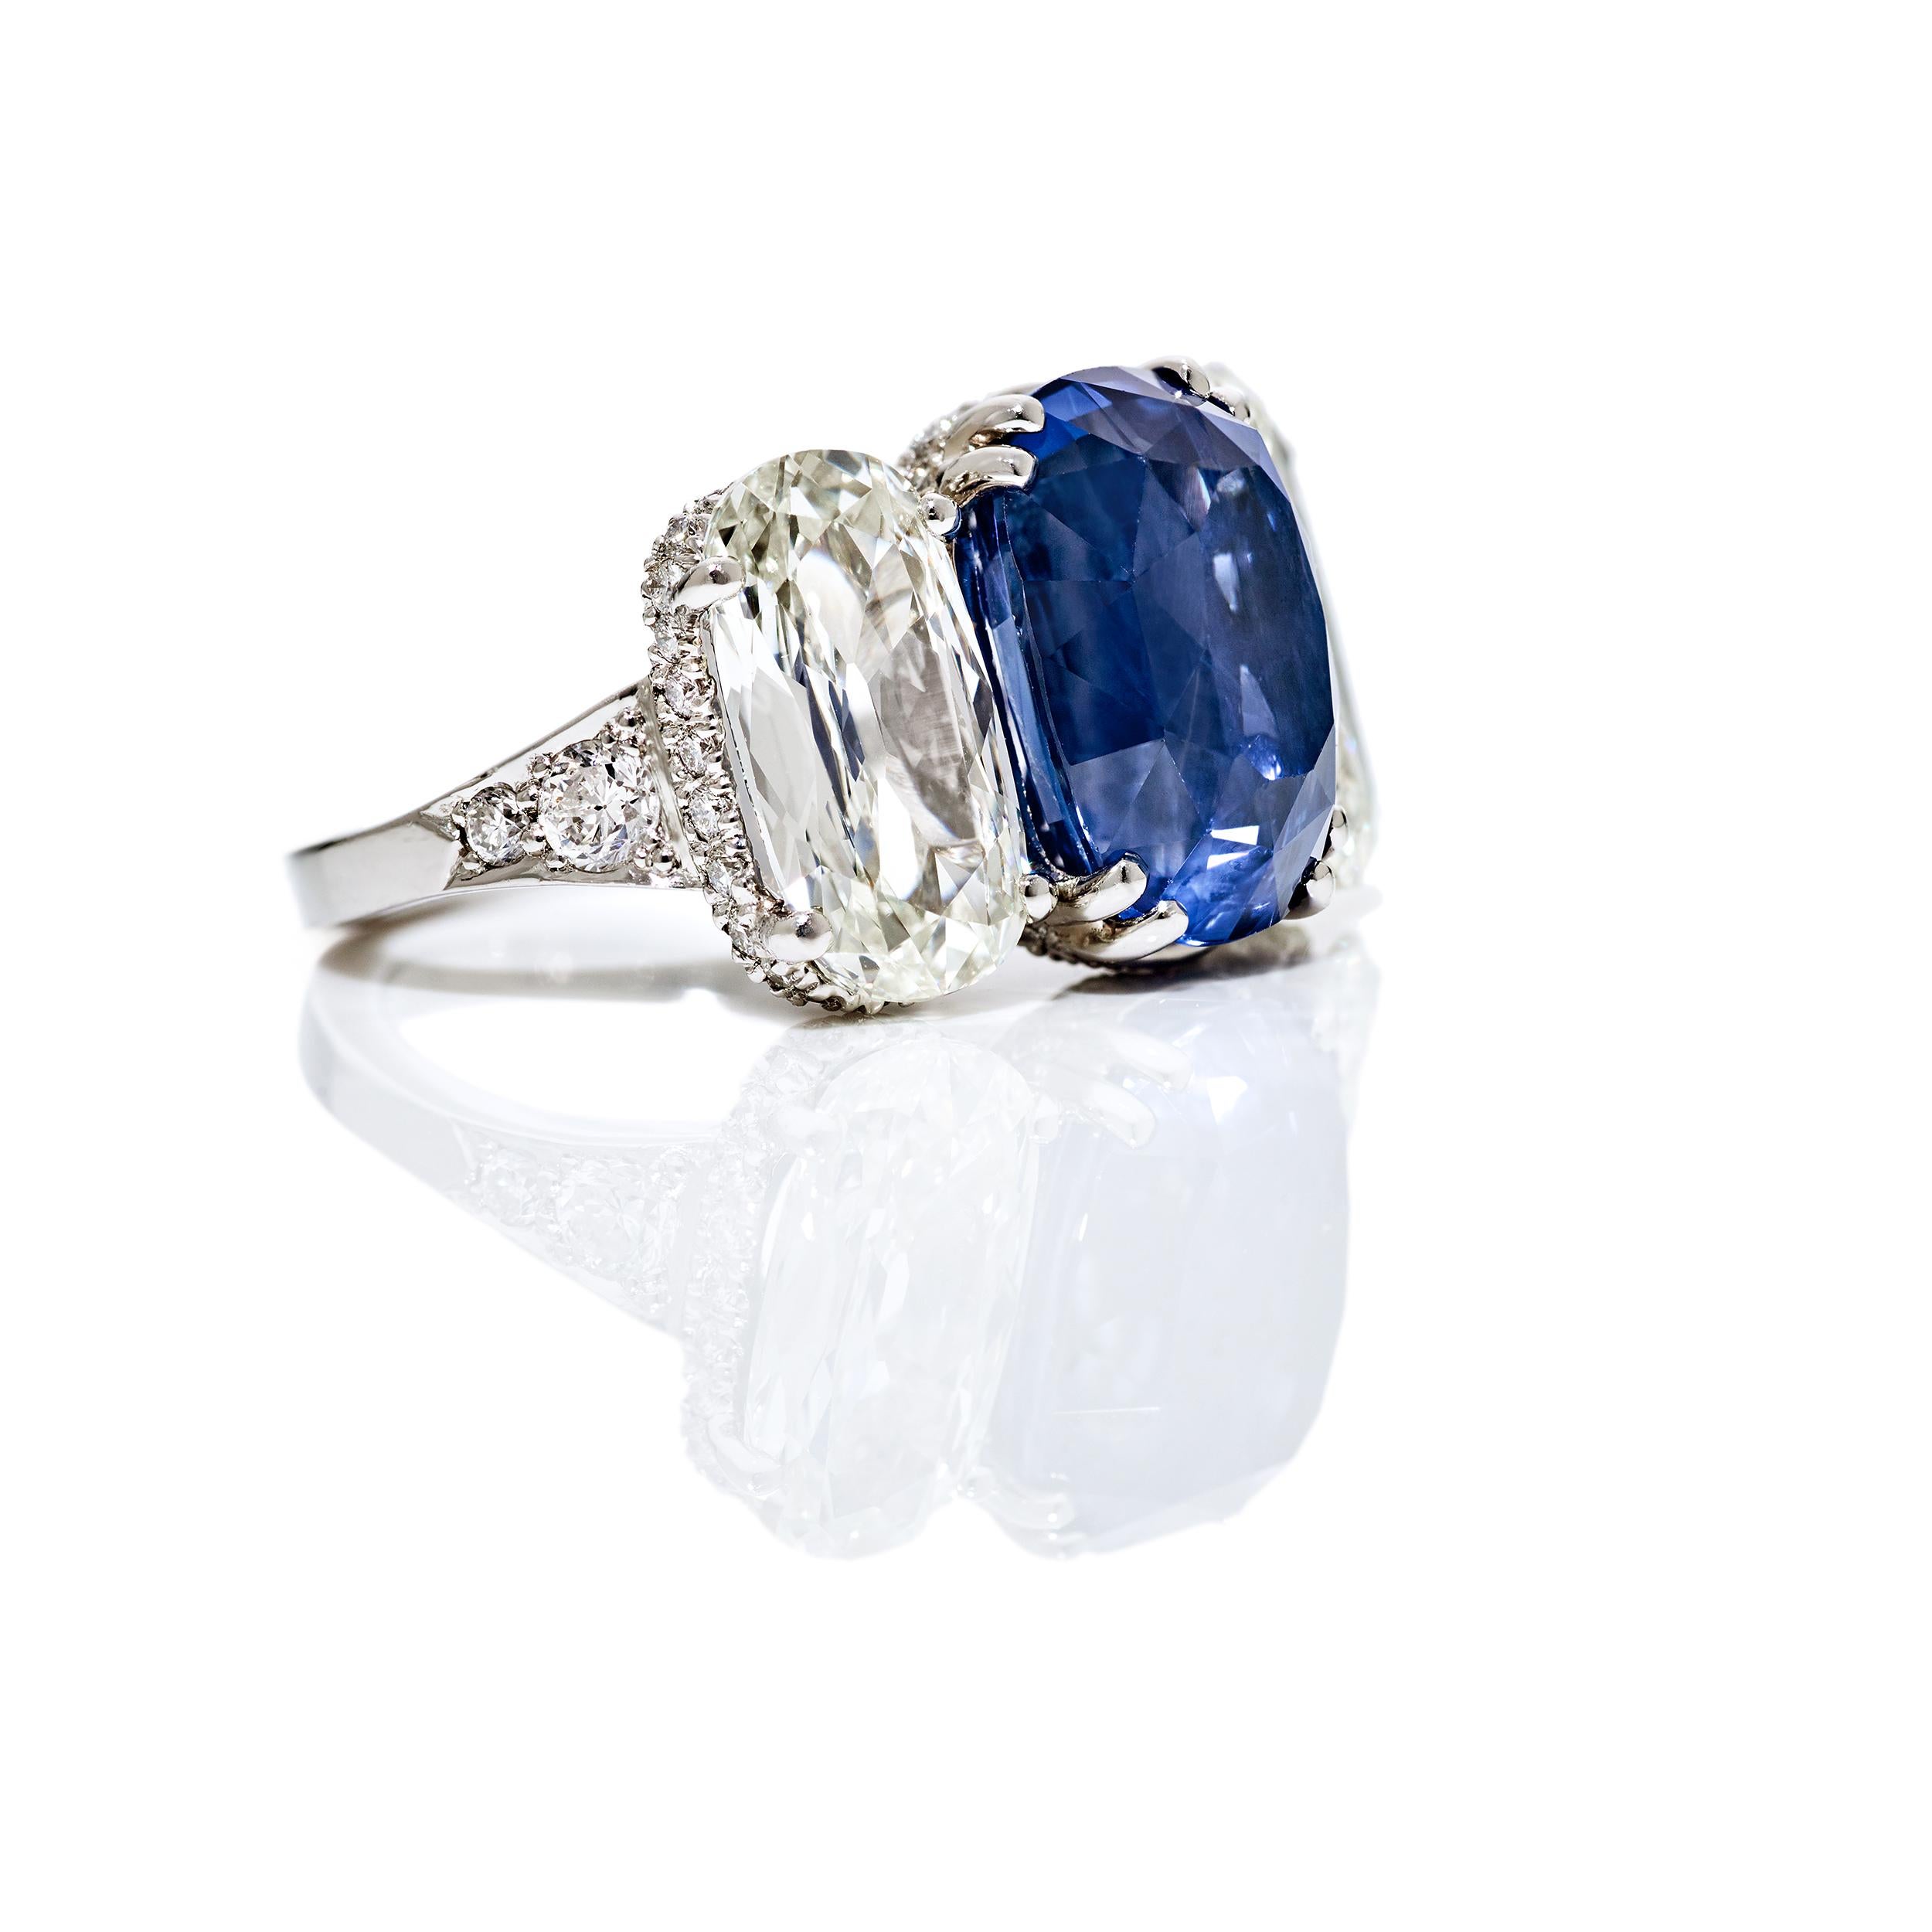 A one of a kind creation by Kiersten Elizabeth using a magnificent 9.98 Carat Elongated Cushion Cut Blue Sapphire center flanked by incredibly striking matched Elongated Cushion Cut Diamonds.  The measurements on these one of a kind gems is